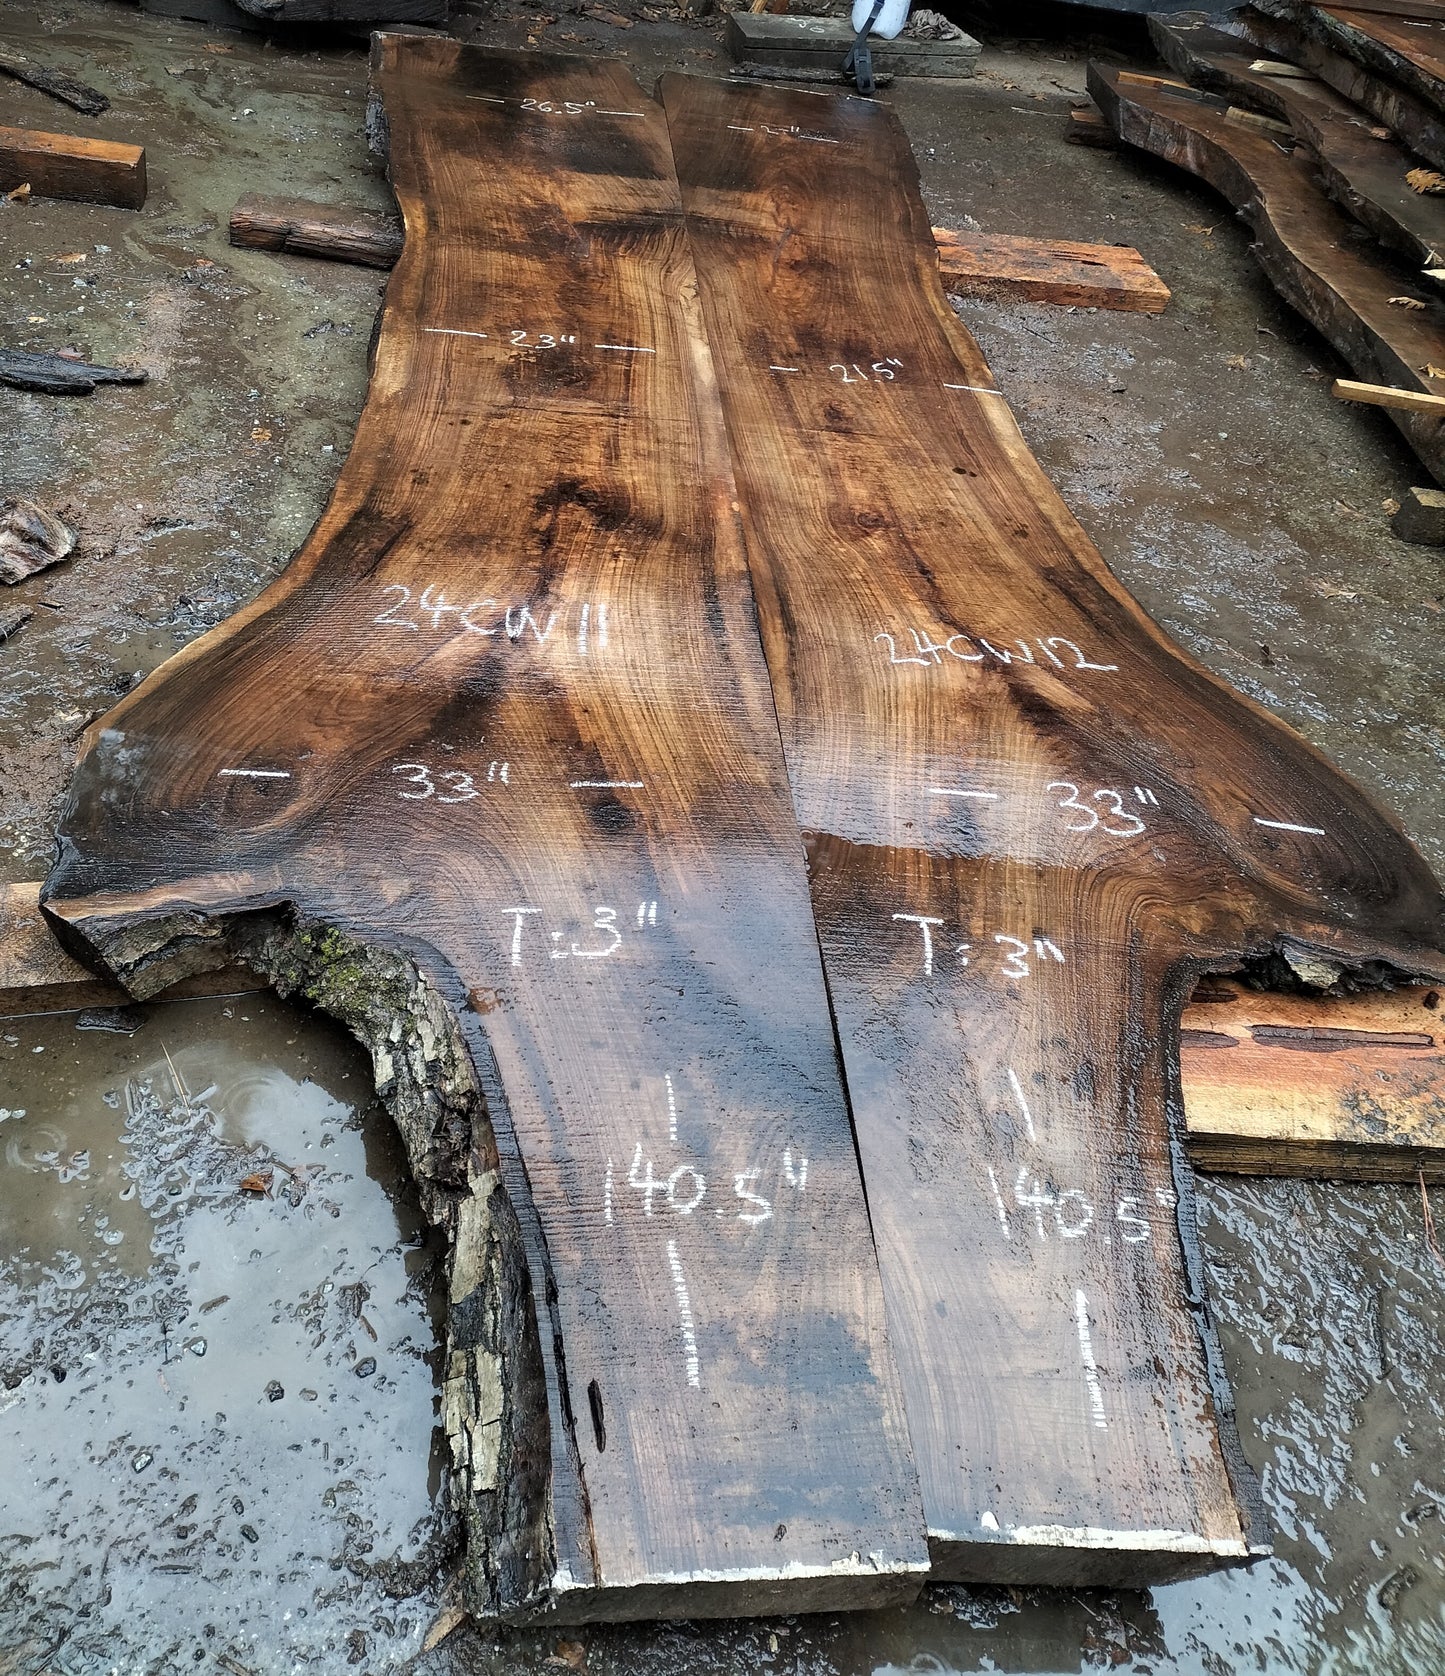 Bookmatch set of English walnut grafted on Claro walnut stock. Reclaimed from a California walnut orchard. Green, unsurfaced.  1: 140.5" x 26.5"-23"-33" x 3" 2: 140.5" x 24"-21.5"-33" x 3" 